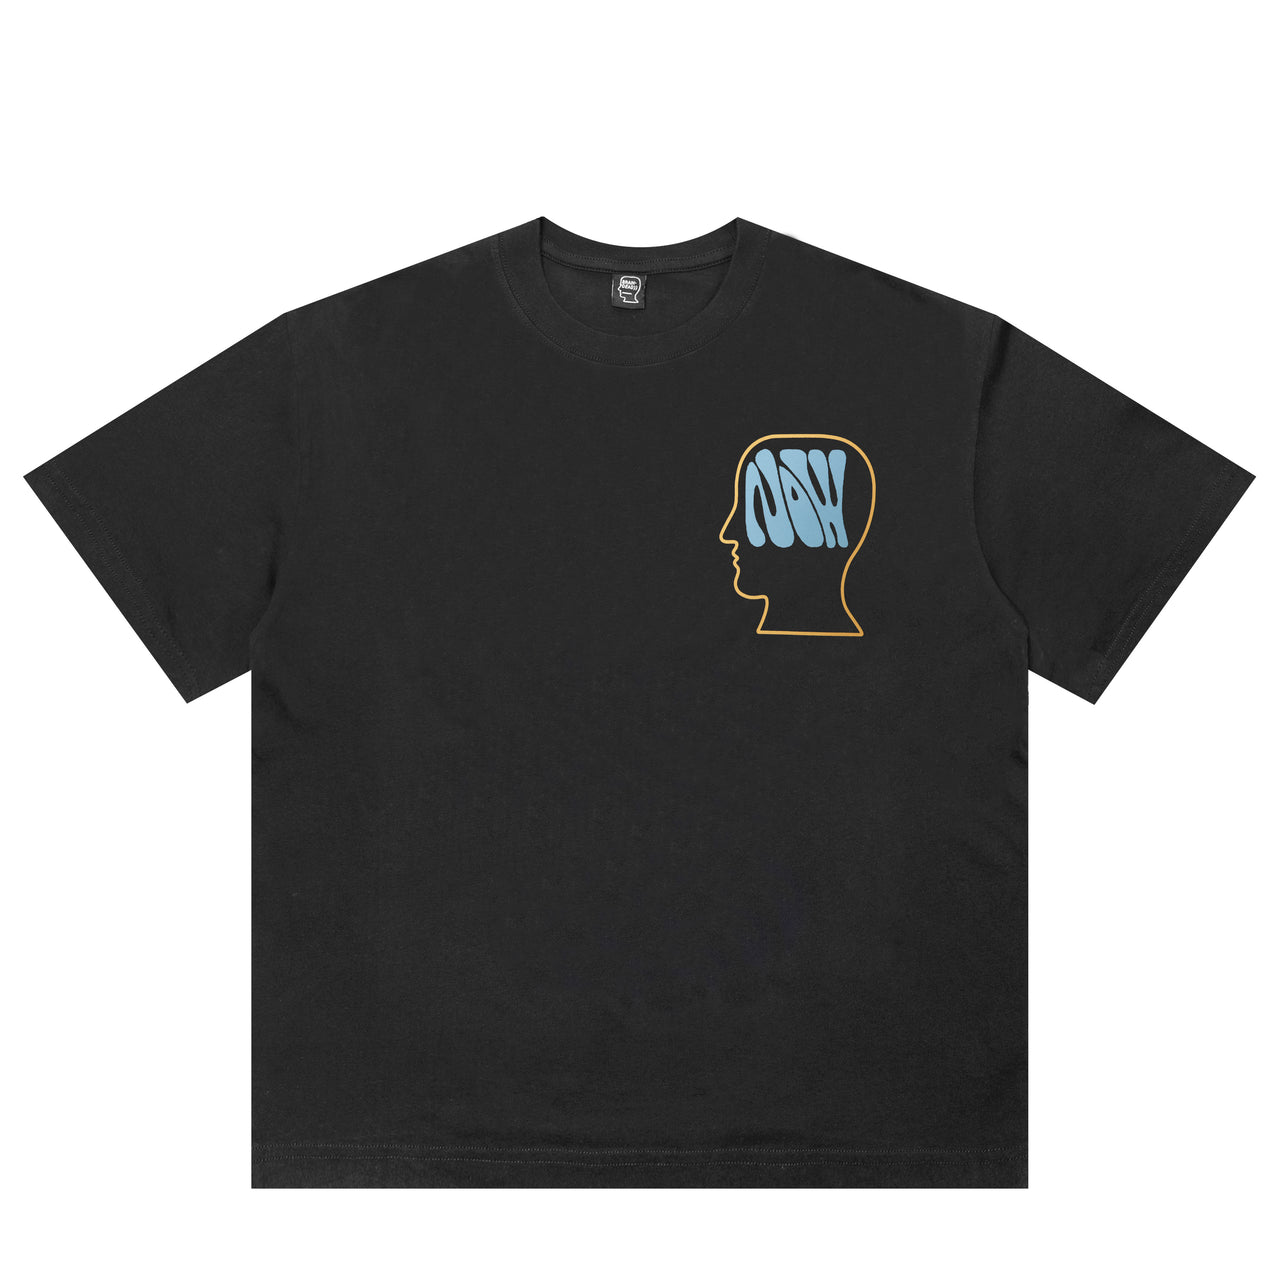 THE NOW MOVEMENT T-SHIRT